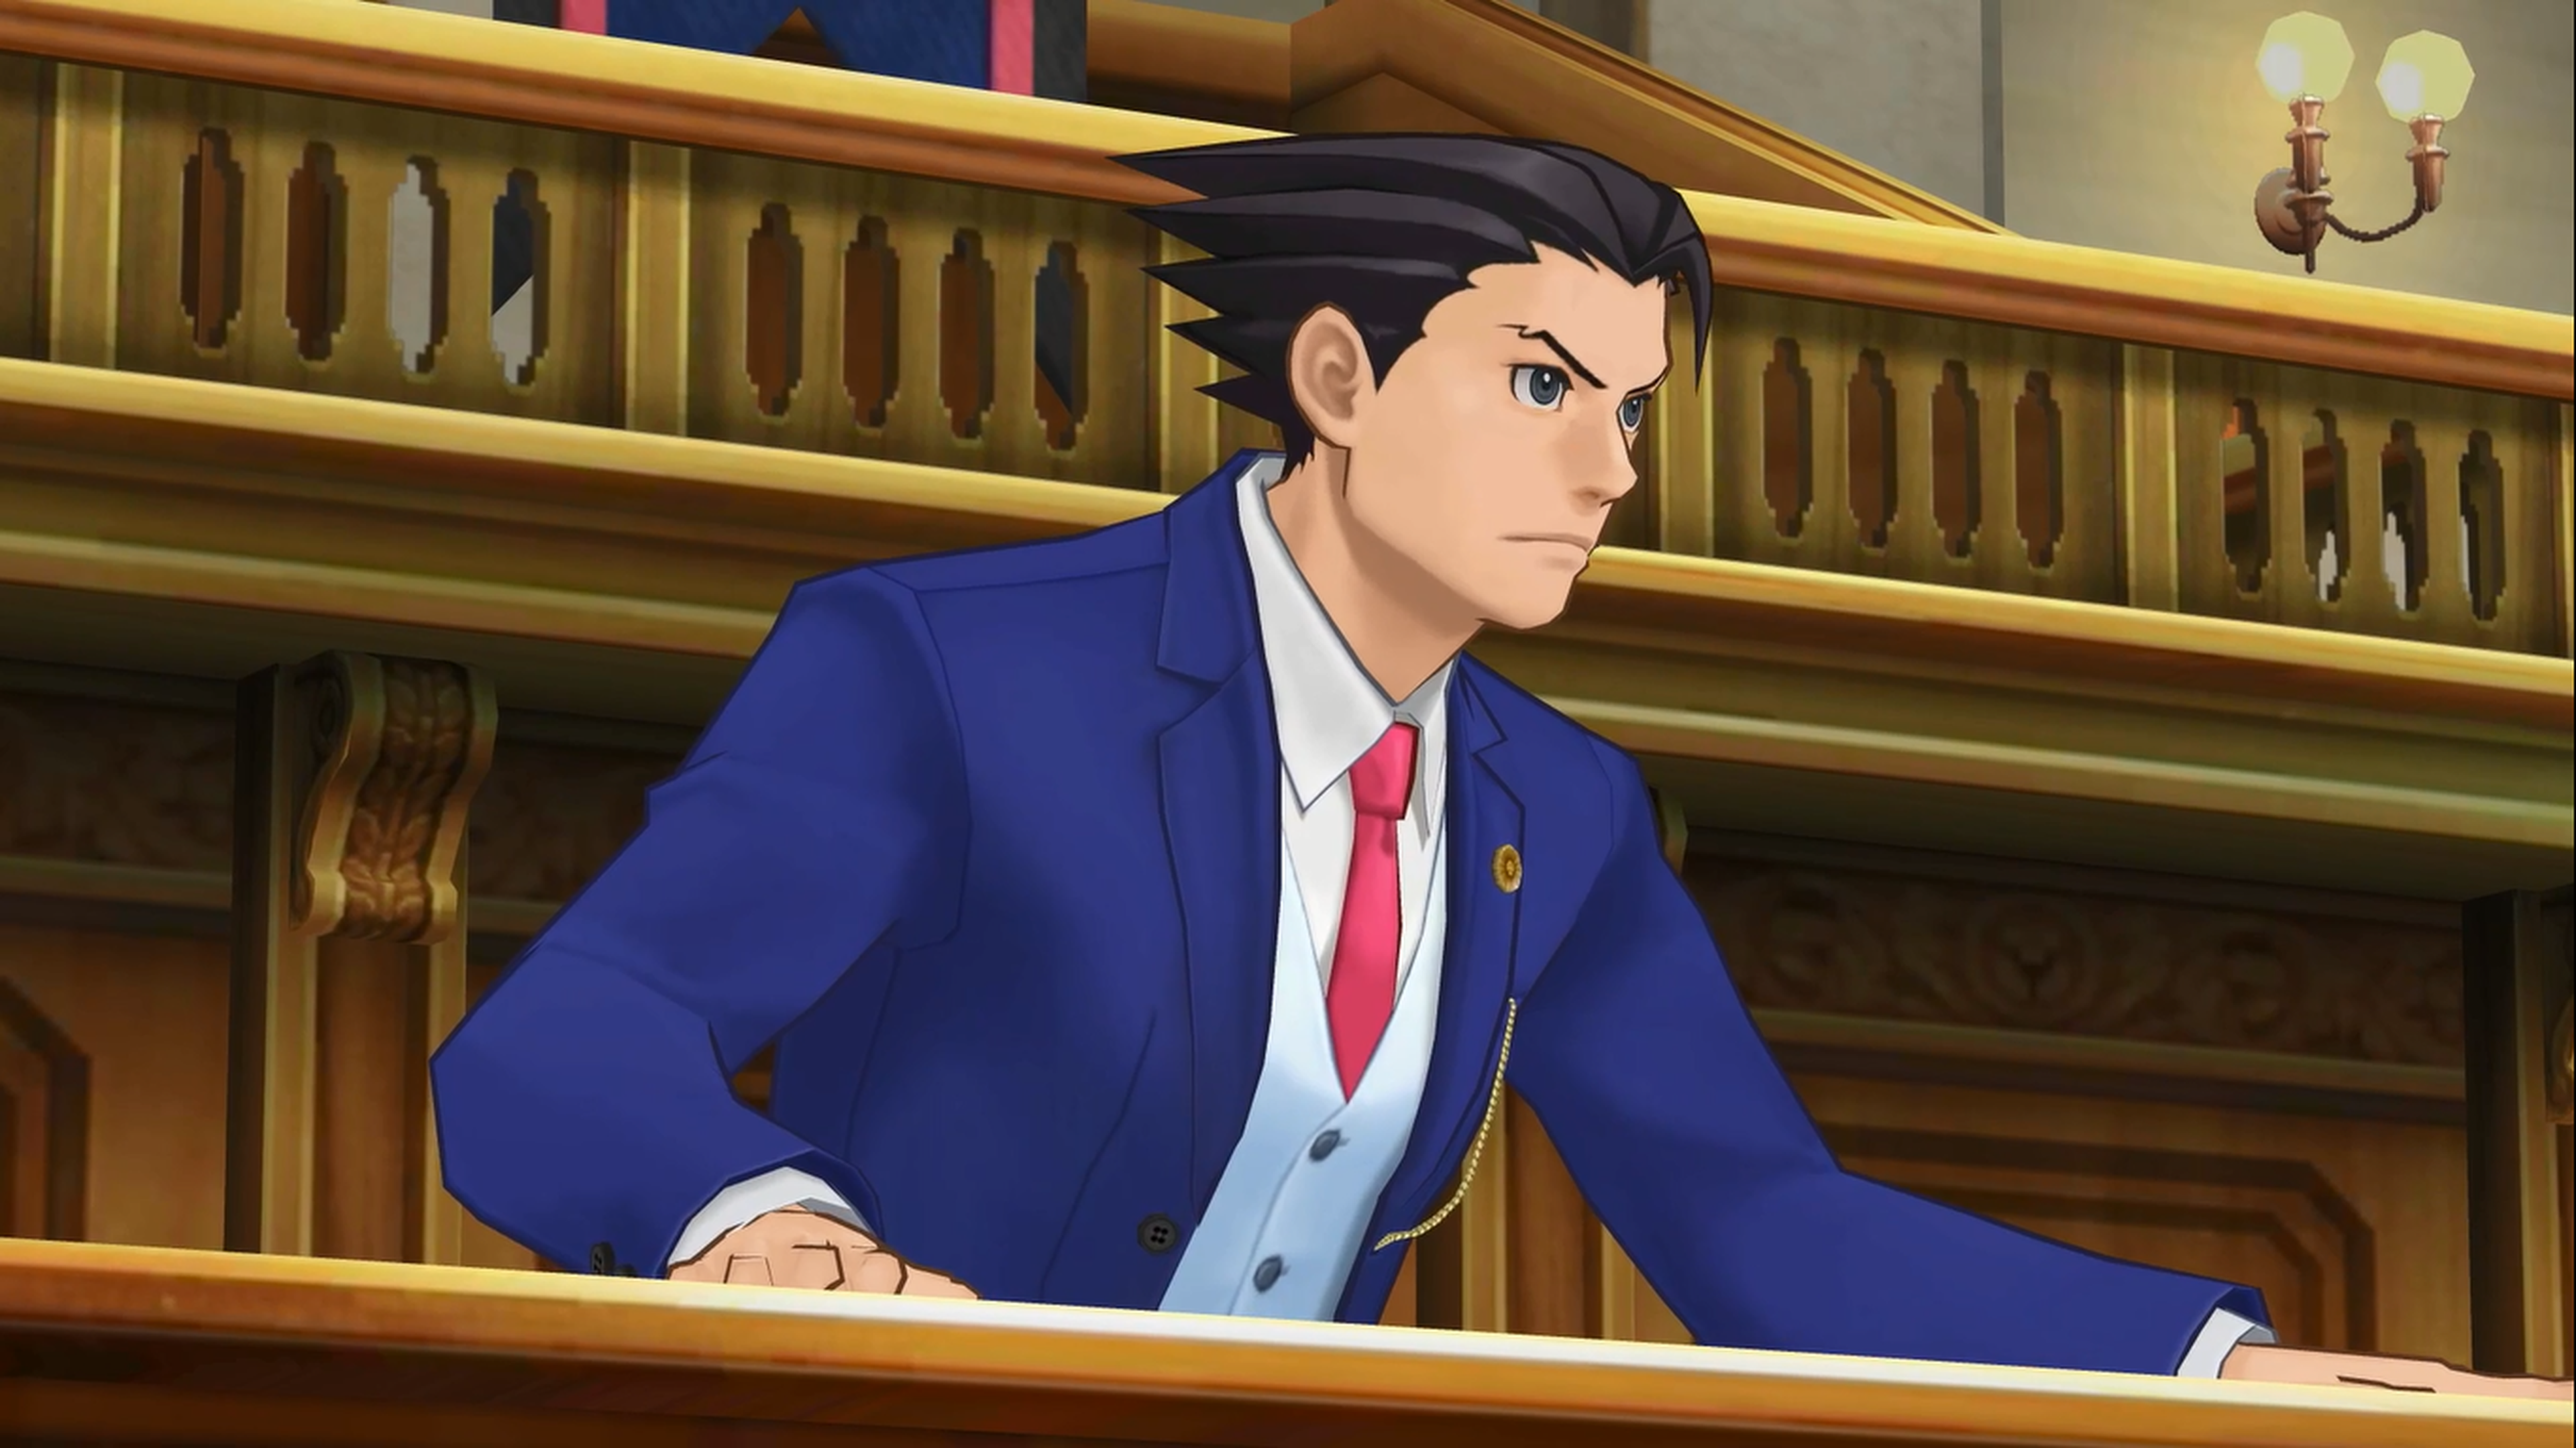 Phoenix Wright Ace Attorney Spirit of Justice DCL